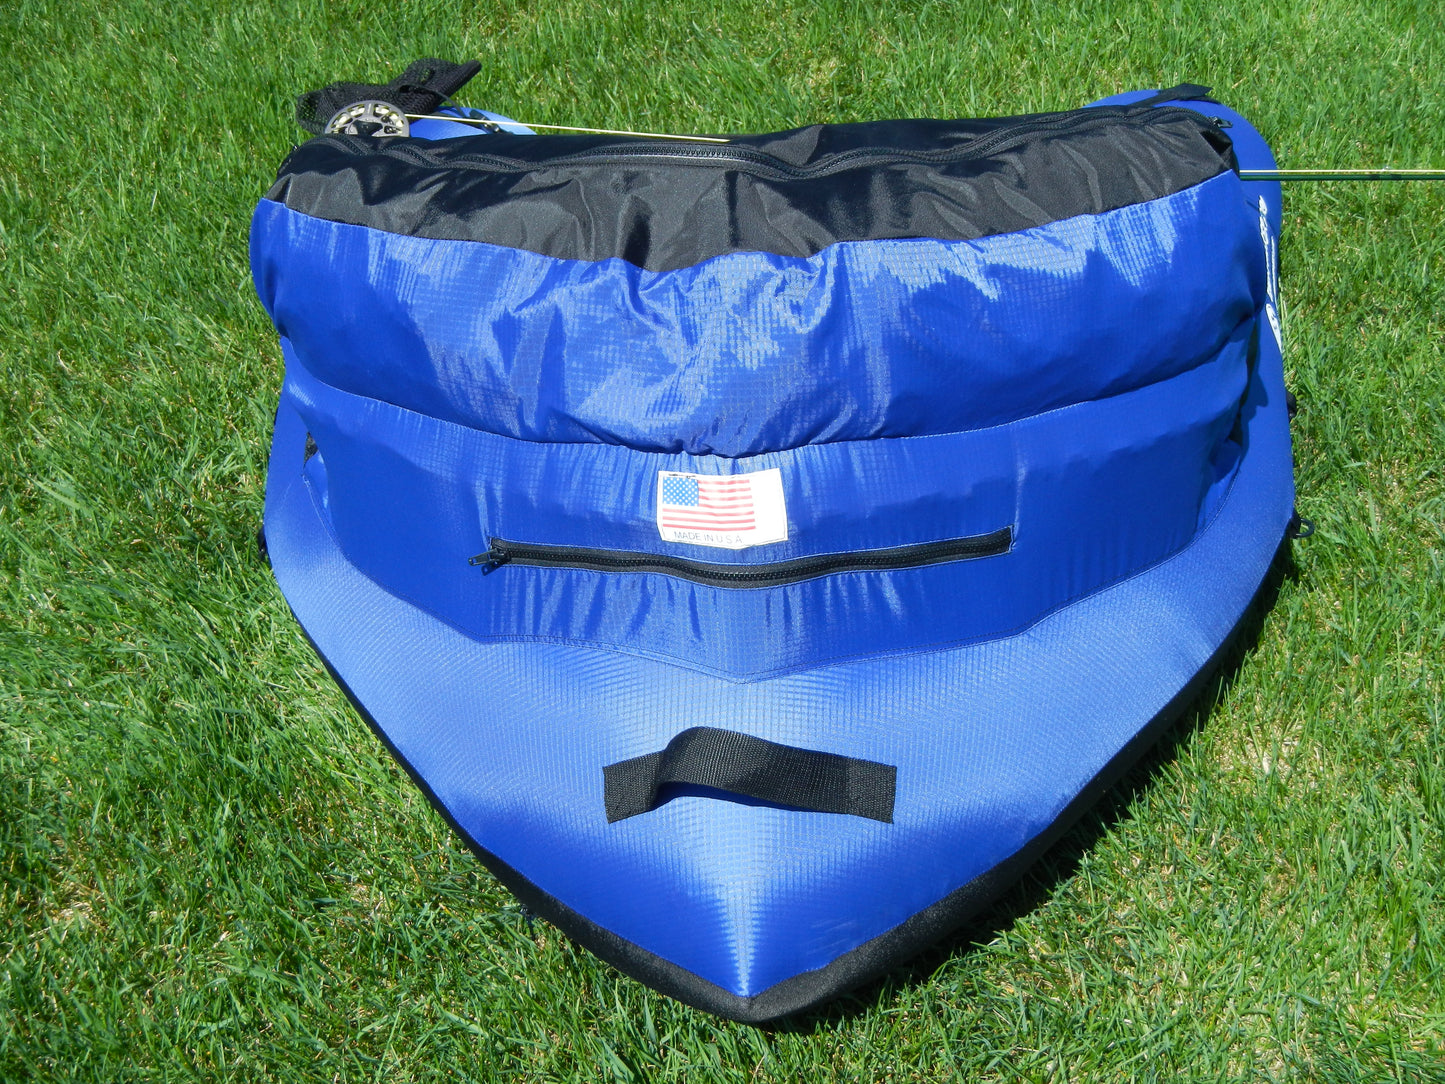 Backpacker Pro Ultralight Float Tube with Double Action Inflation Pump & Custom Mesh Stuff Sack